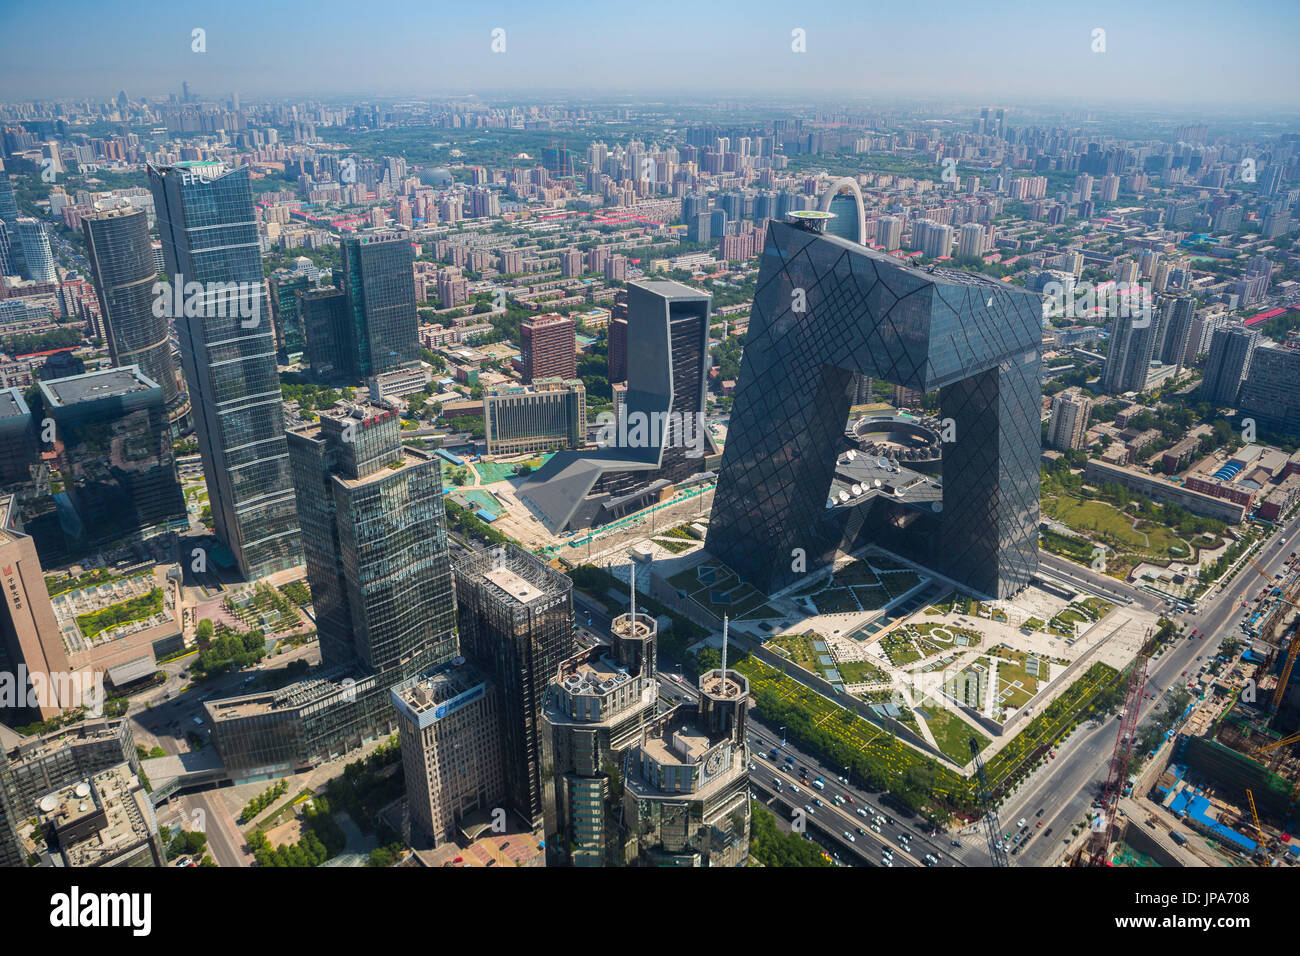 China, Beijing City, Guomao District CCTV Television Headquarters Building Stock Photo